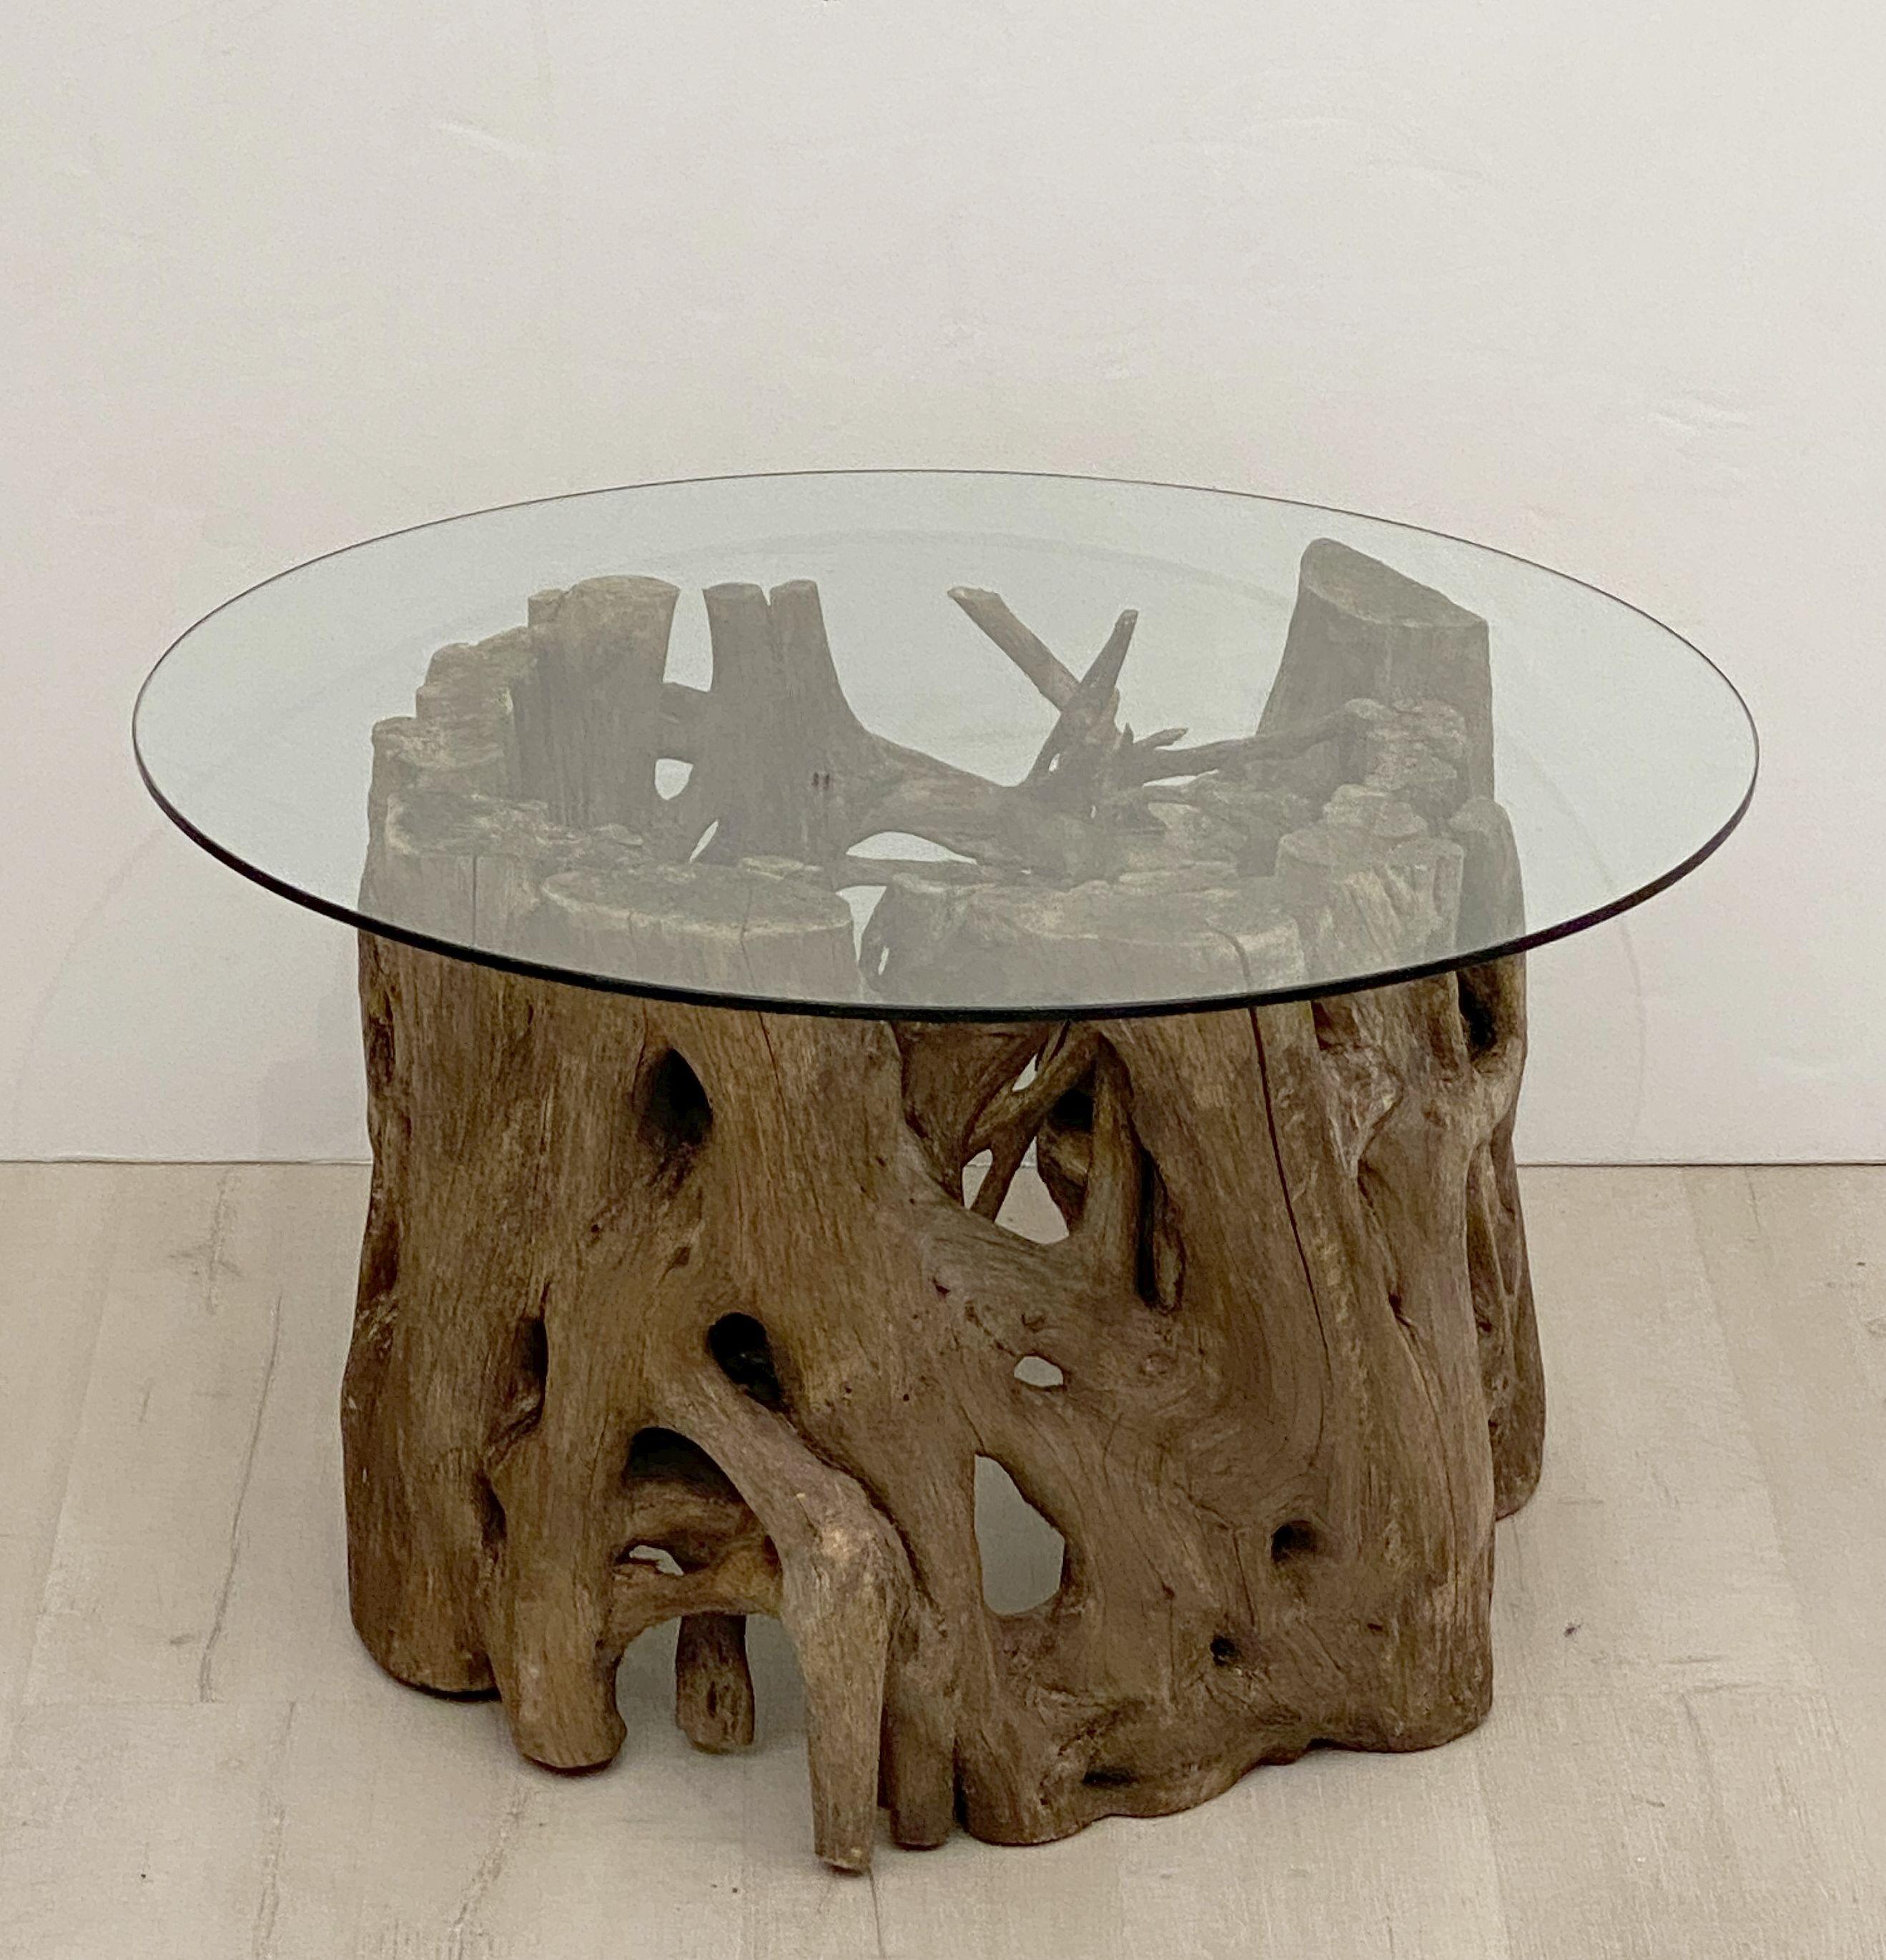 A fine French low table featuring a round or circular glass top set upon a rustic mangrove bog wood or driftwood base.

Perfect for use as a coffee or cocktail table.

Dimensions: Height 18 inches x Diameter 31 1/2 inches.